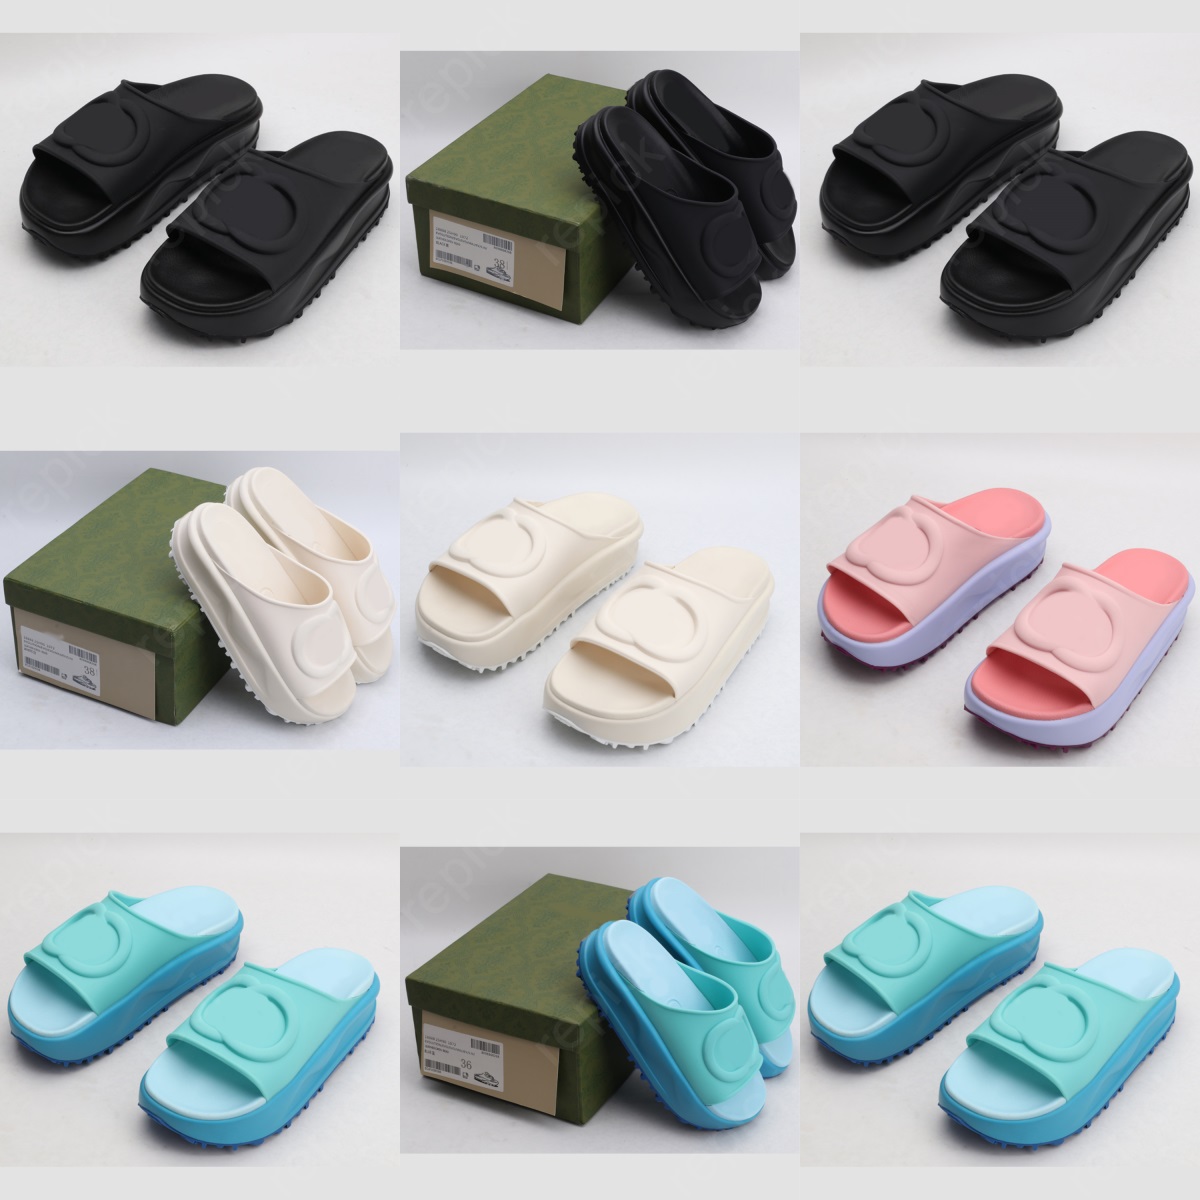 

2022 trend thick bottom designer slipper sandal womans fashion high heel pantoufle sliders ladys summer indoor slippers outdoor Non-slip, As shown in the picture